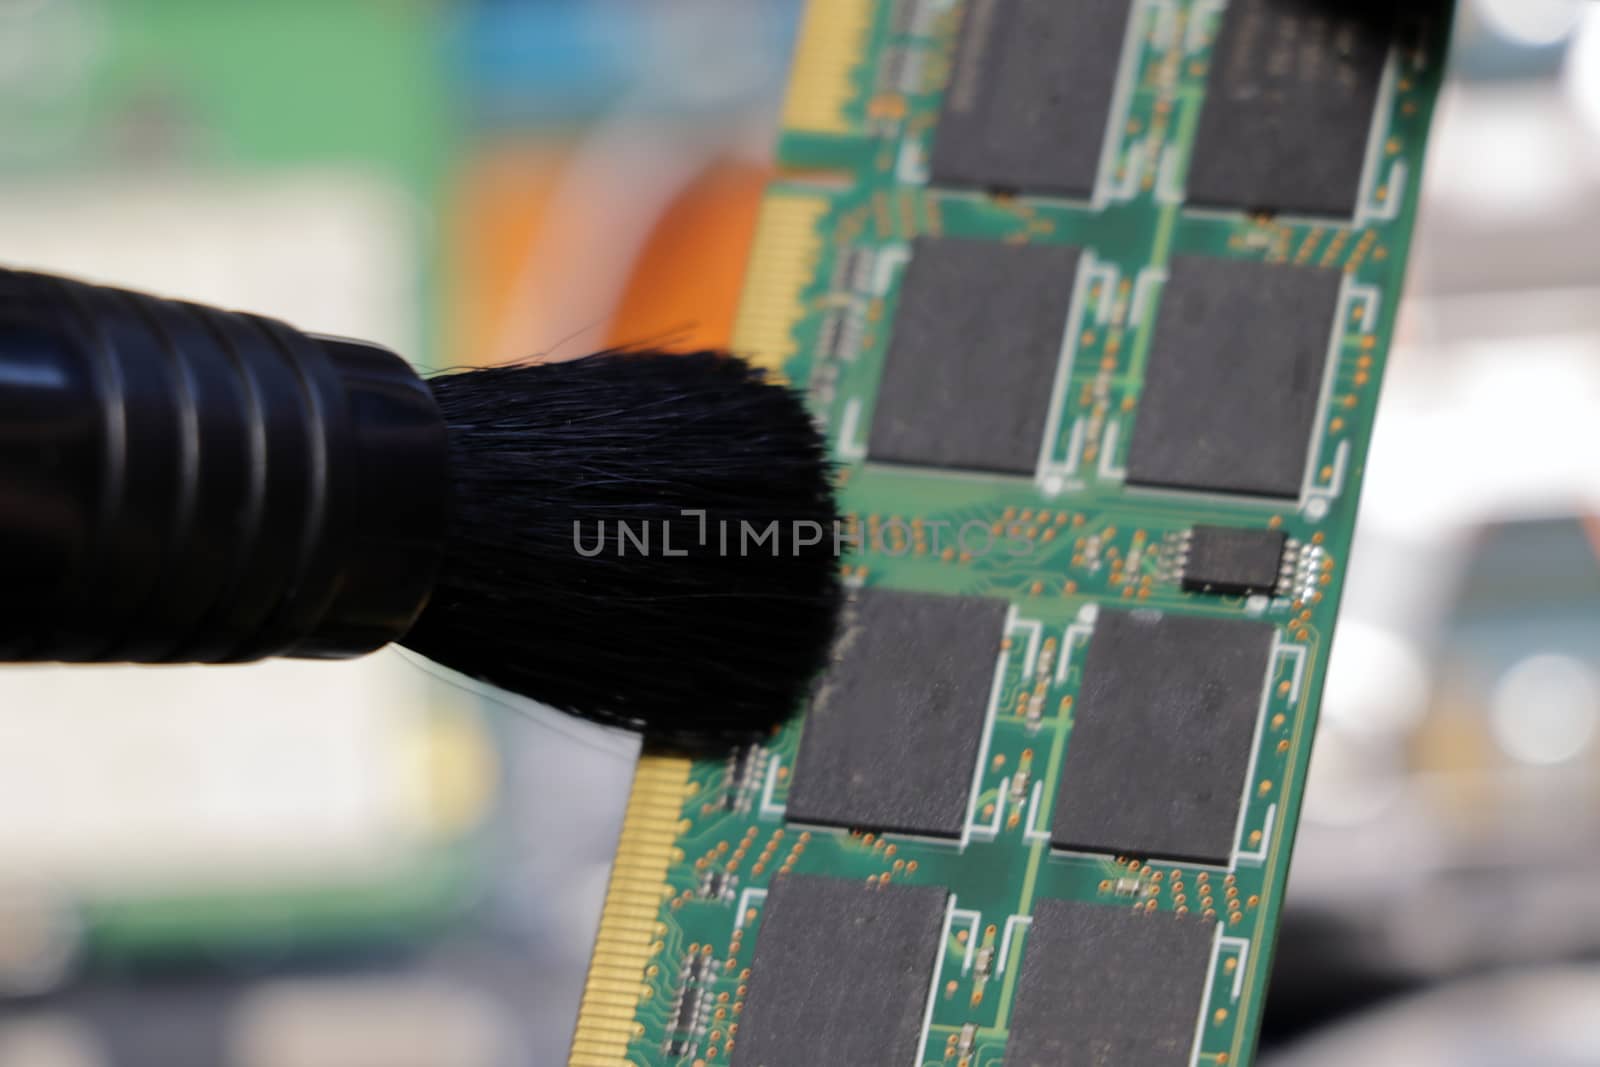 The service center worker cleans dust at Random Access Memory or electronic board RAM